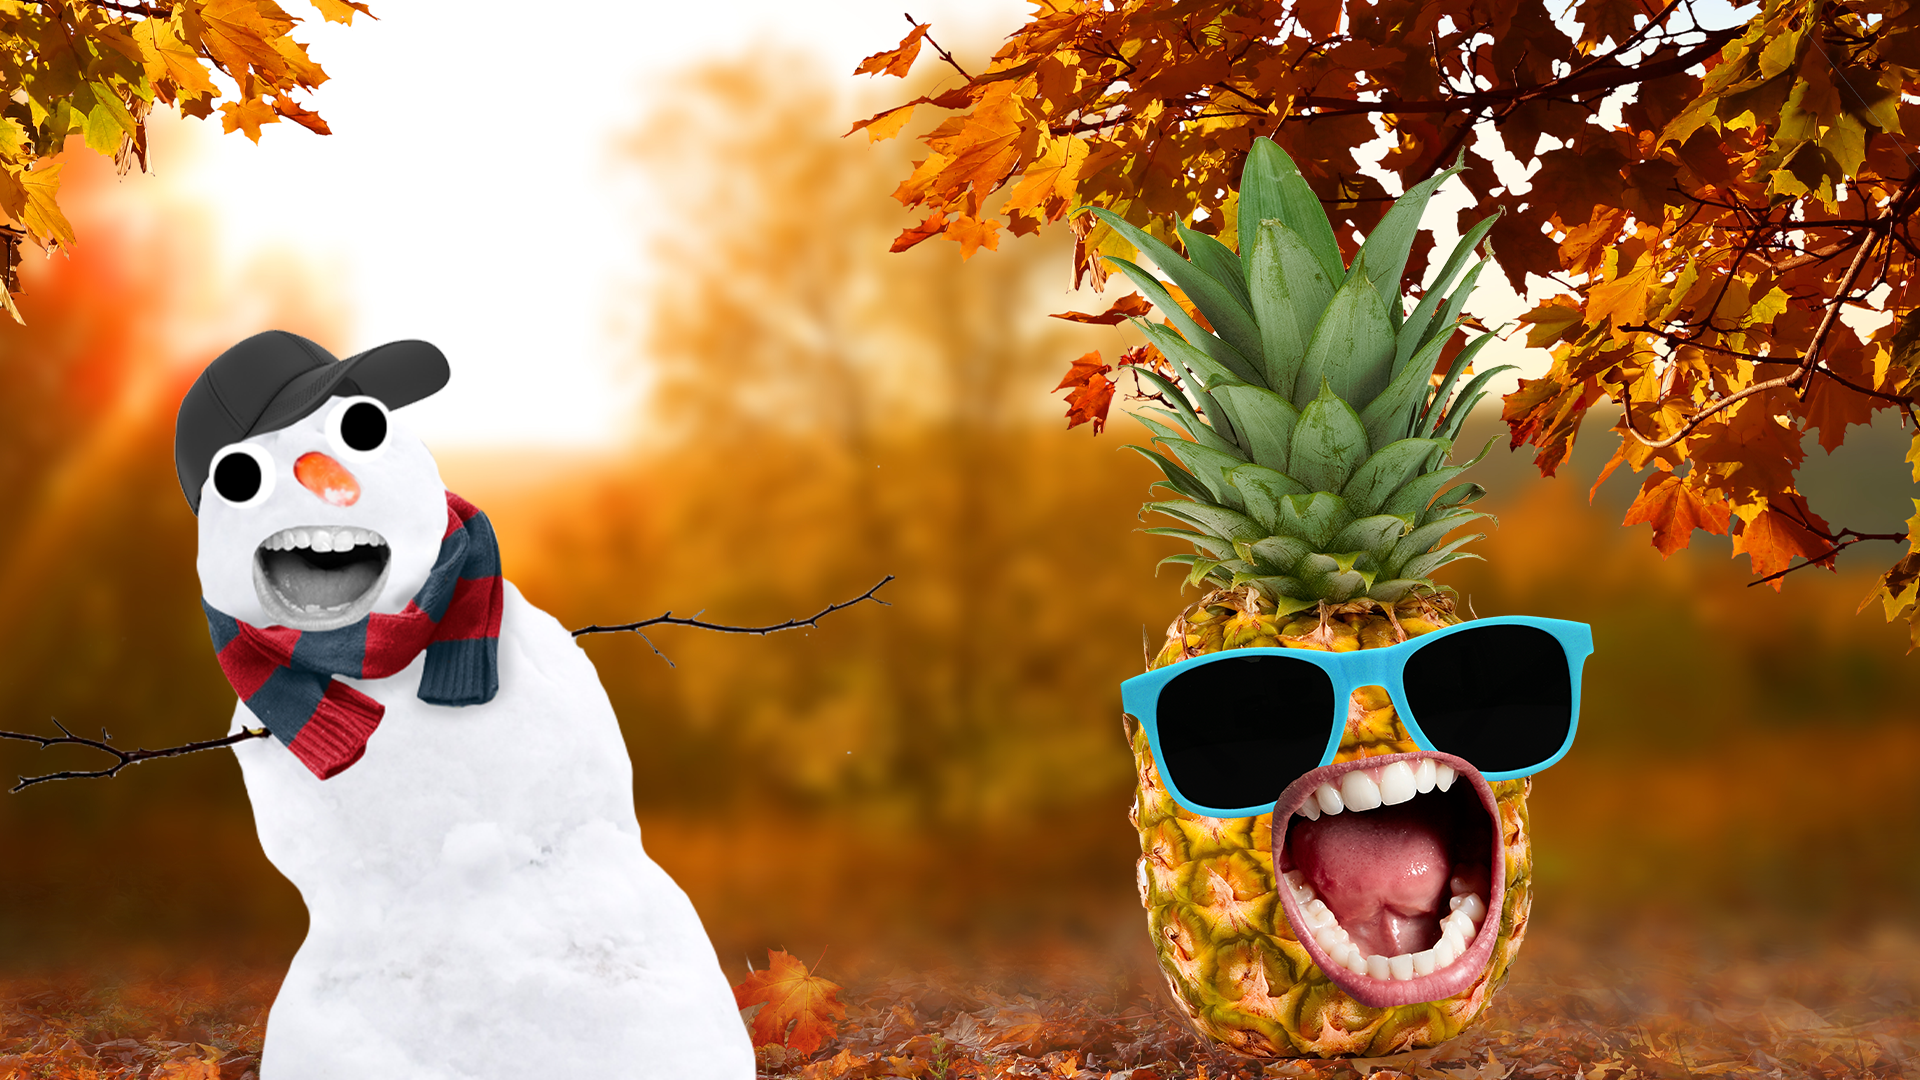 Snowman and summer pineapple in autumn woods